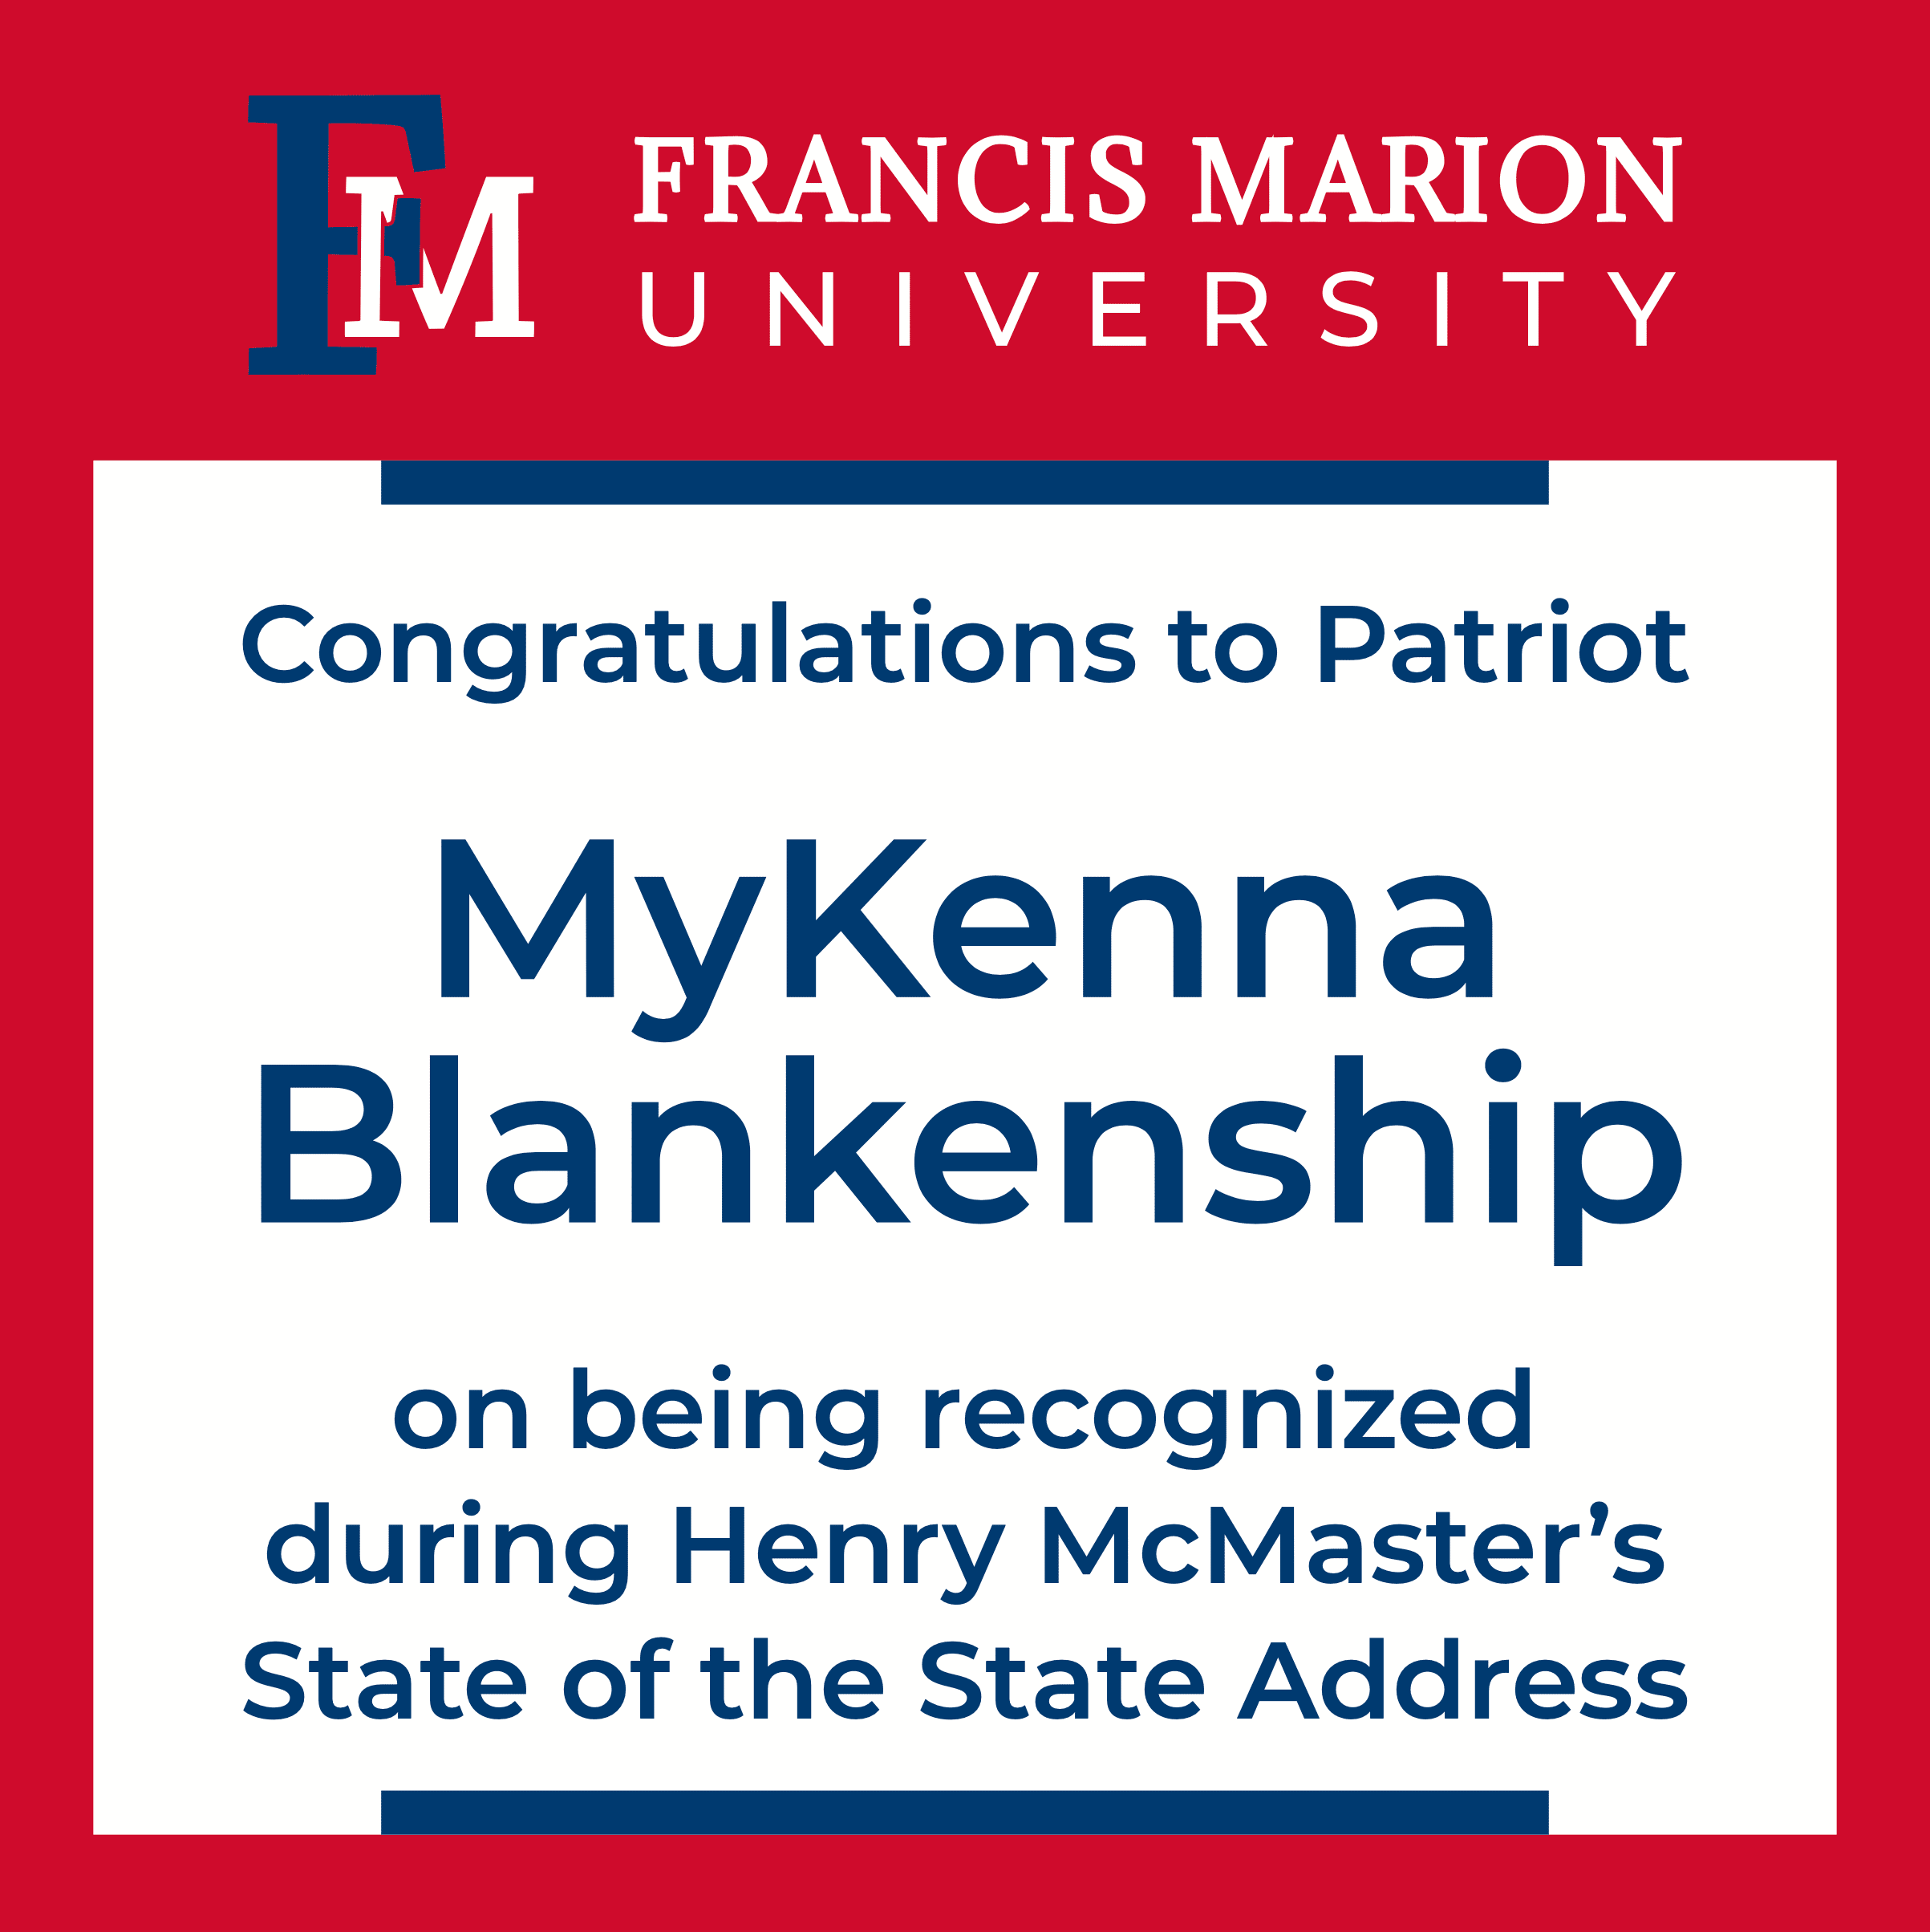 FMU Alumna Blankenship Recognized During McMaster’s State of the State Address